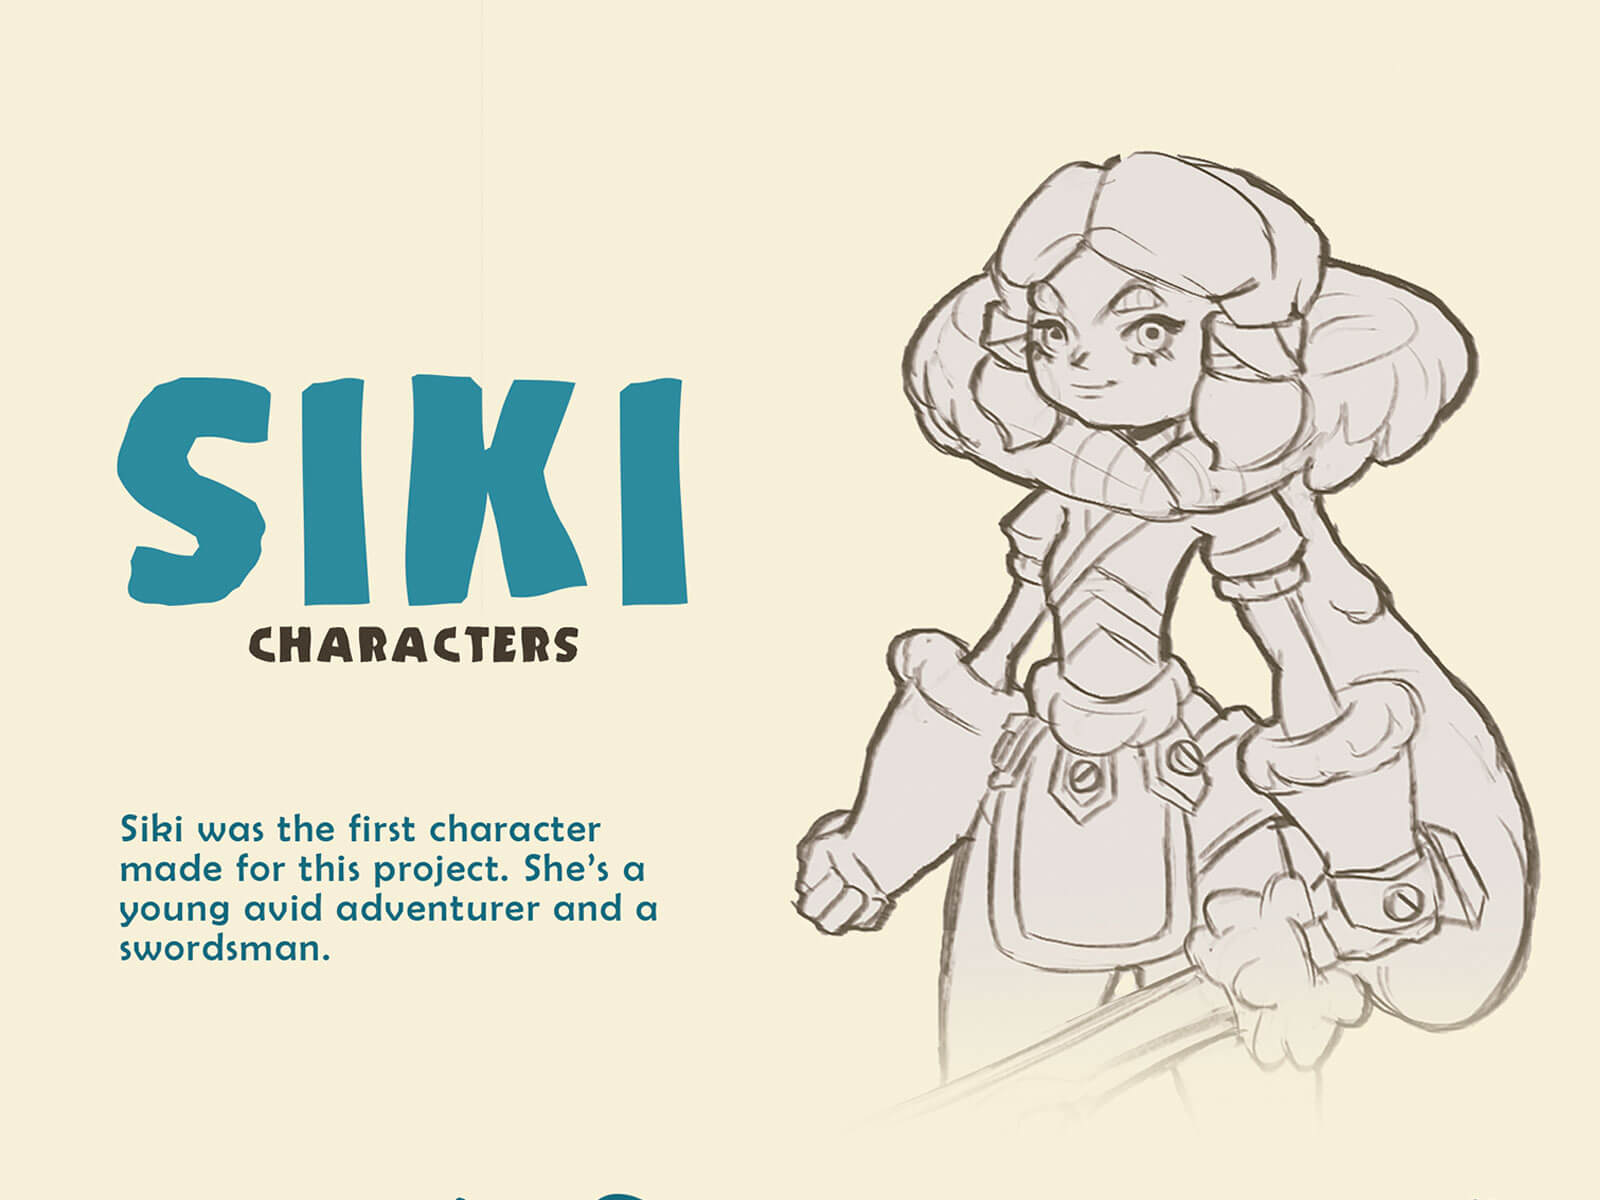 Character design sketch of Siki from Legend of Kamui.